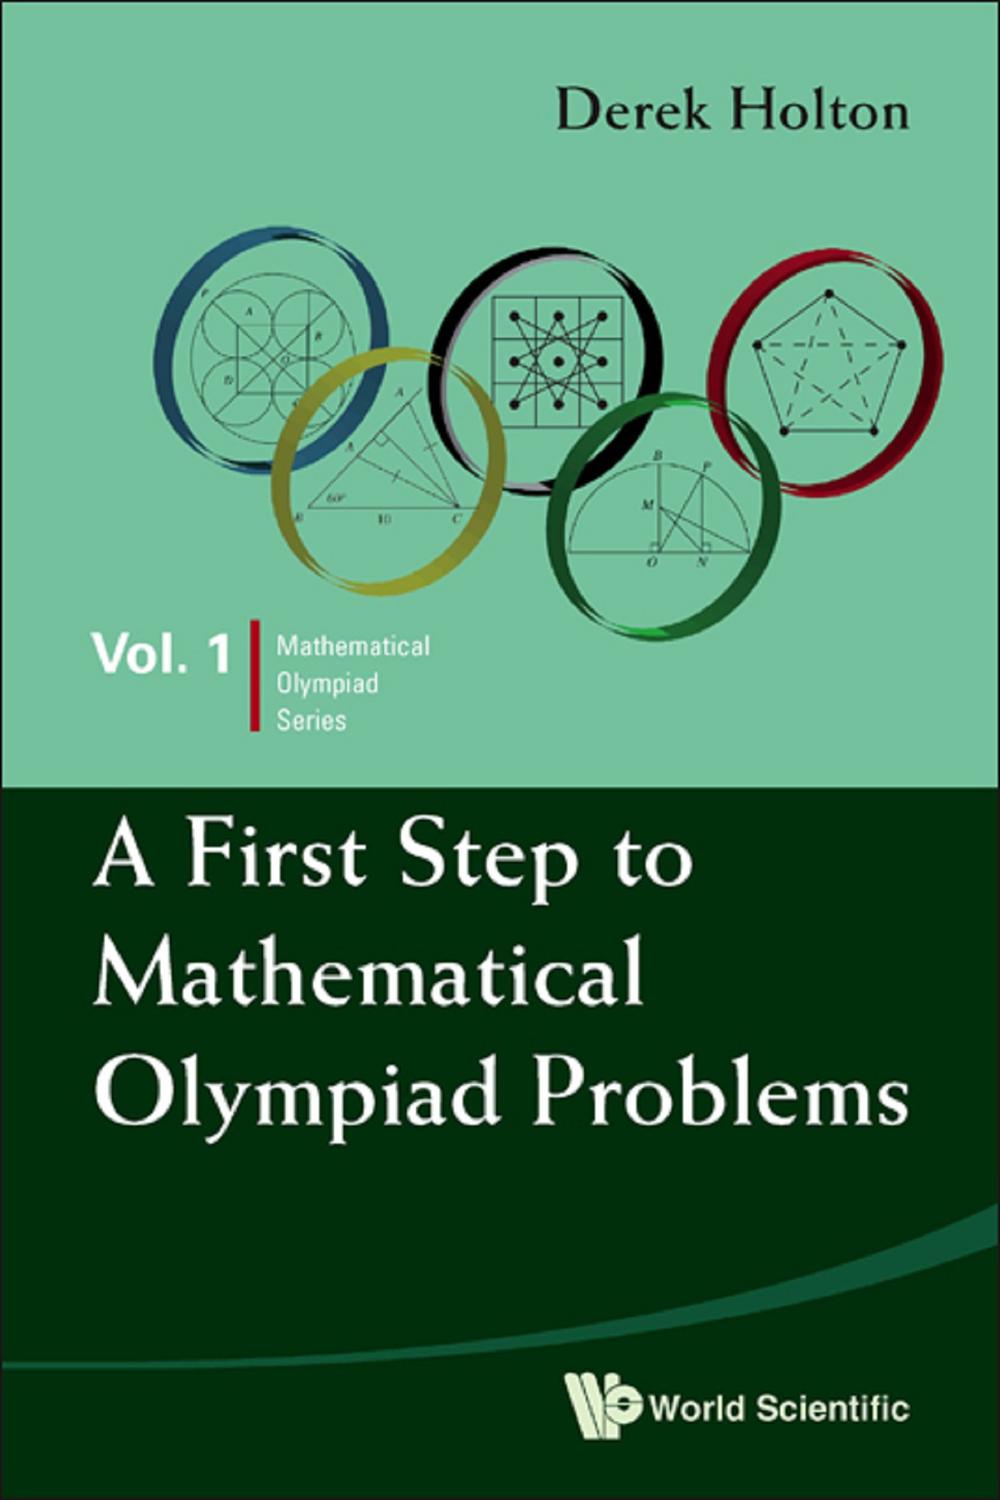 A First Step to Mathematical Olympiad Problems - Derek Holton